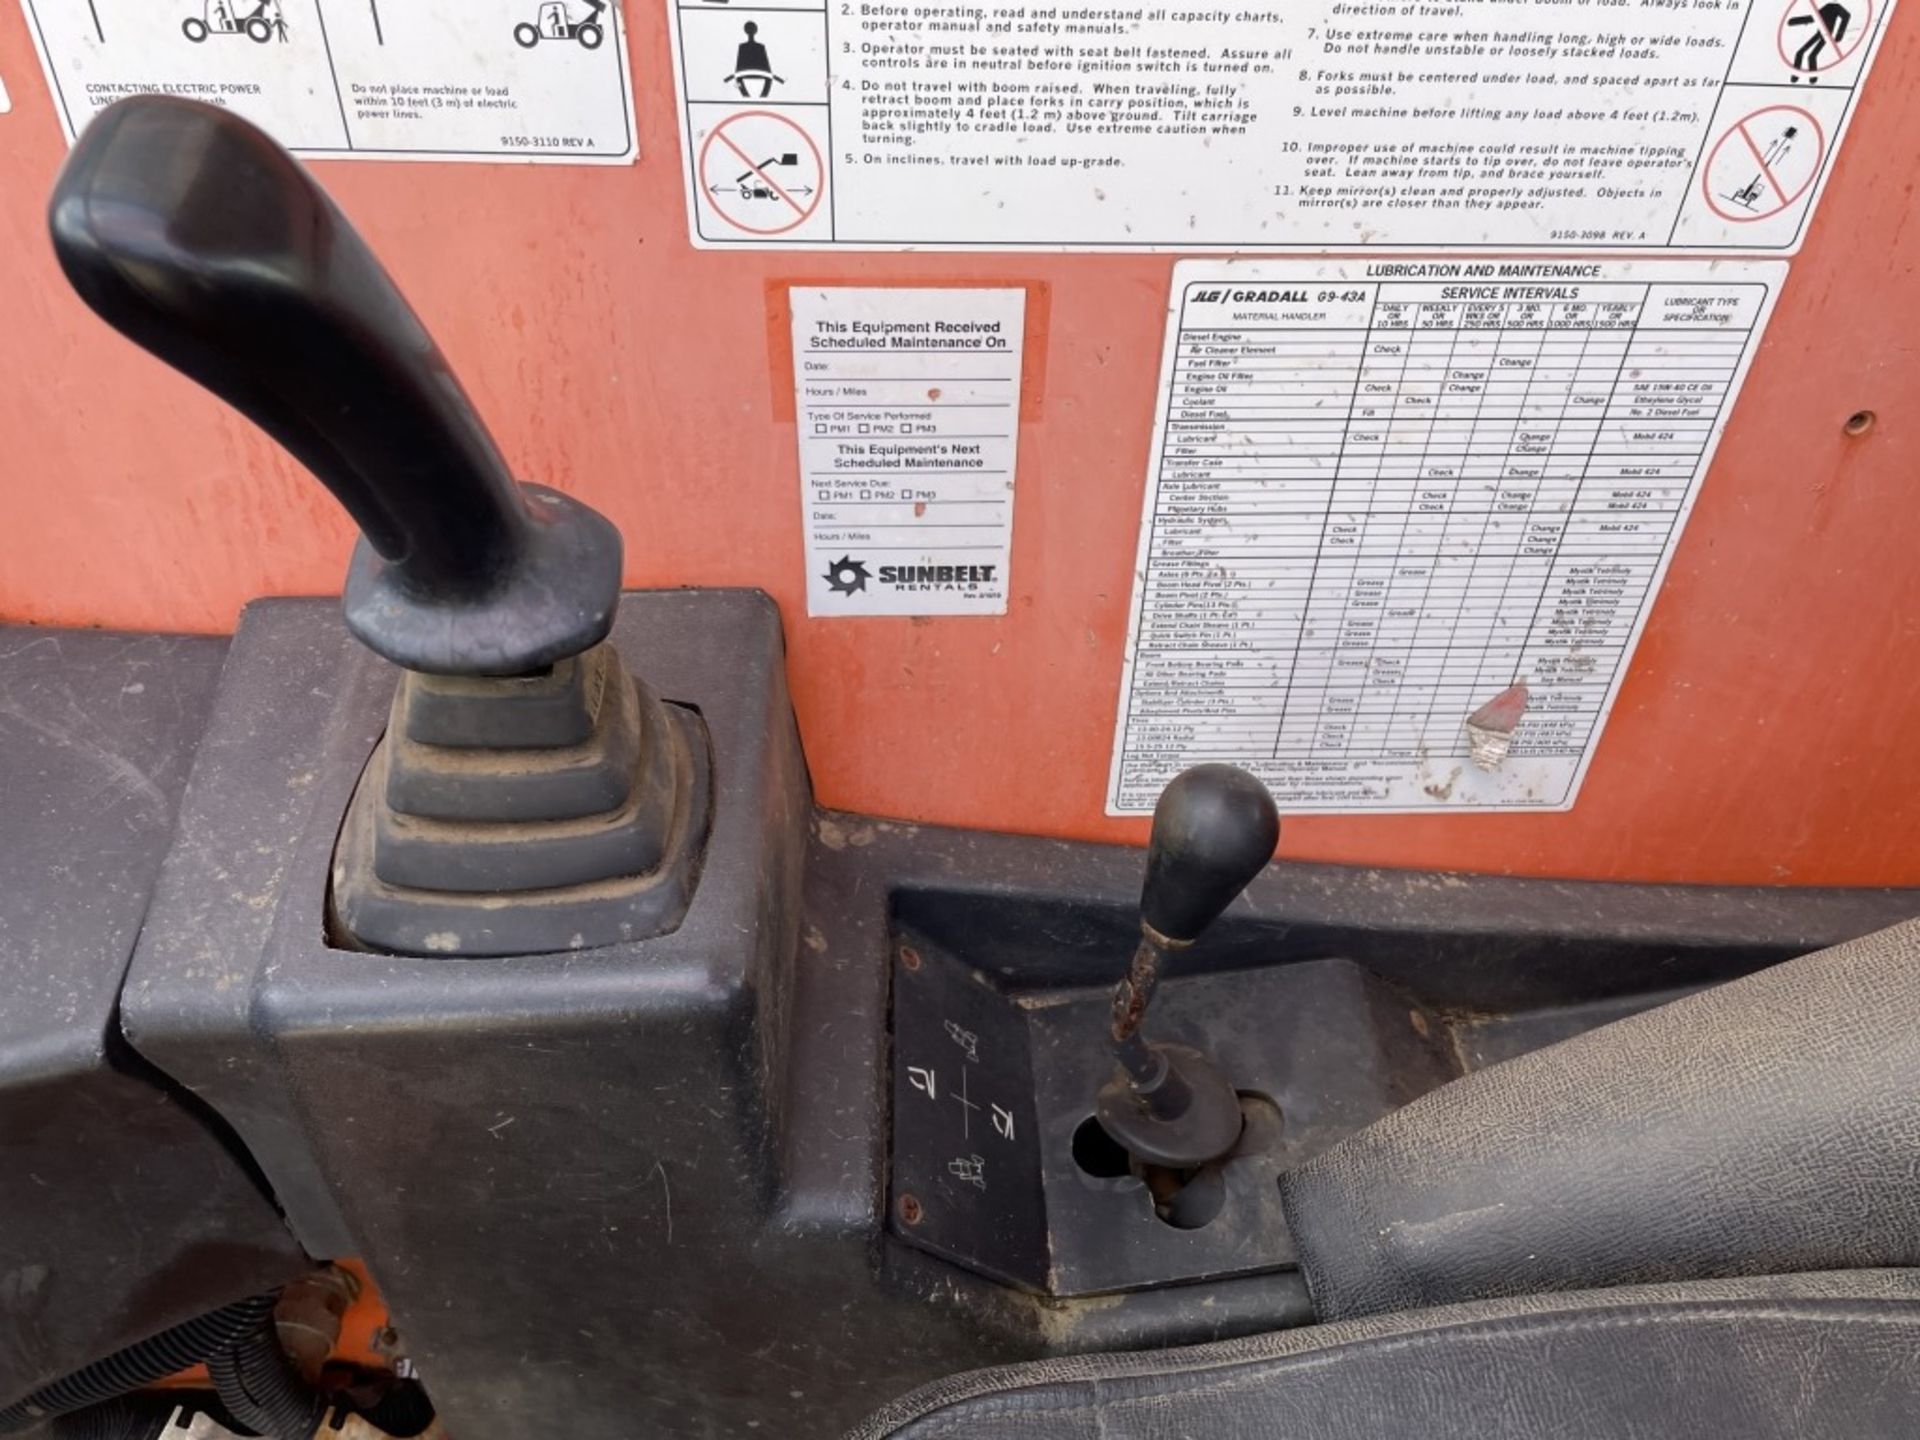 2005 JLG G9-43A Telescopic Forklift - Image 20 of 21